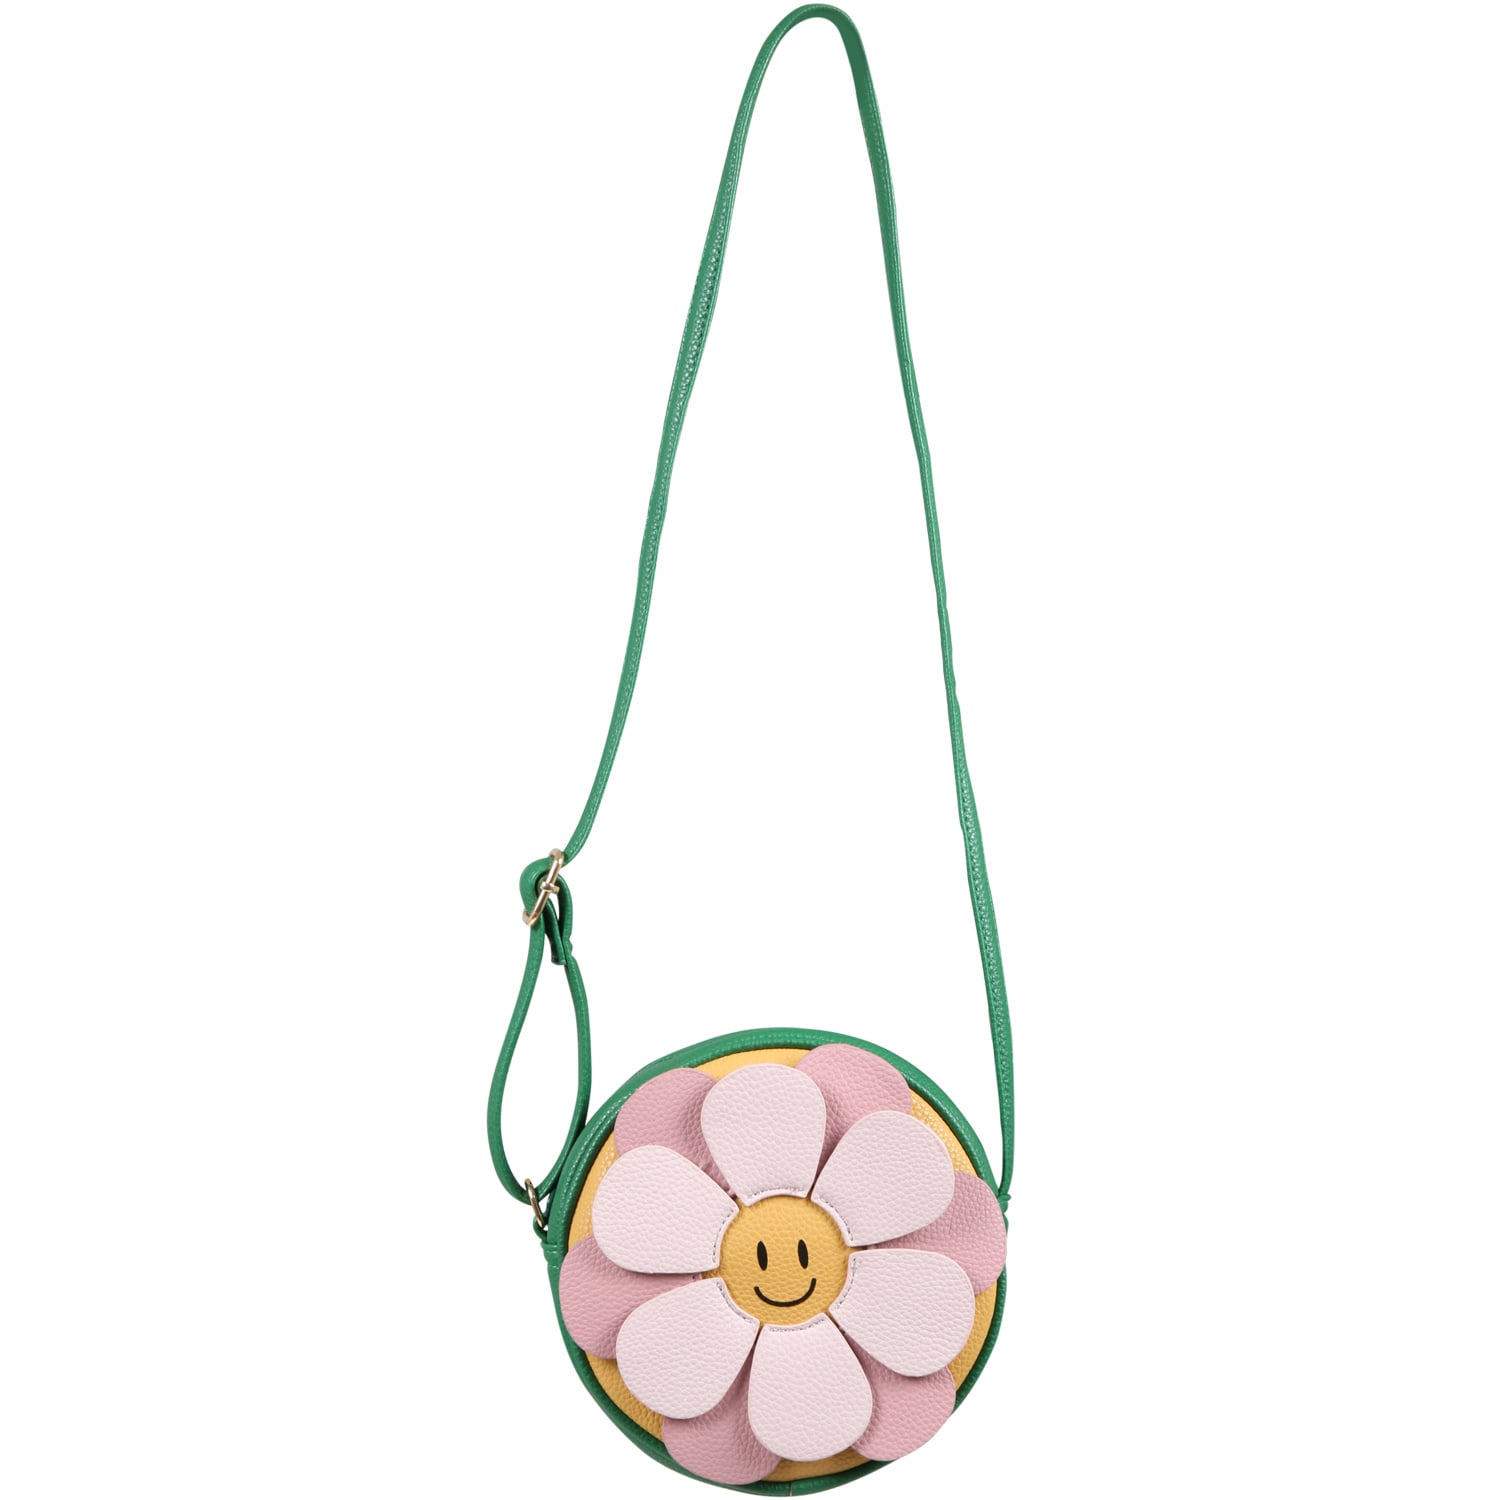 Molo Green Bag For Girl With Flower